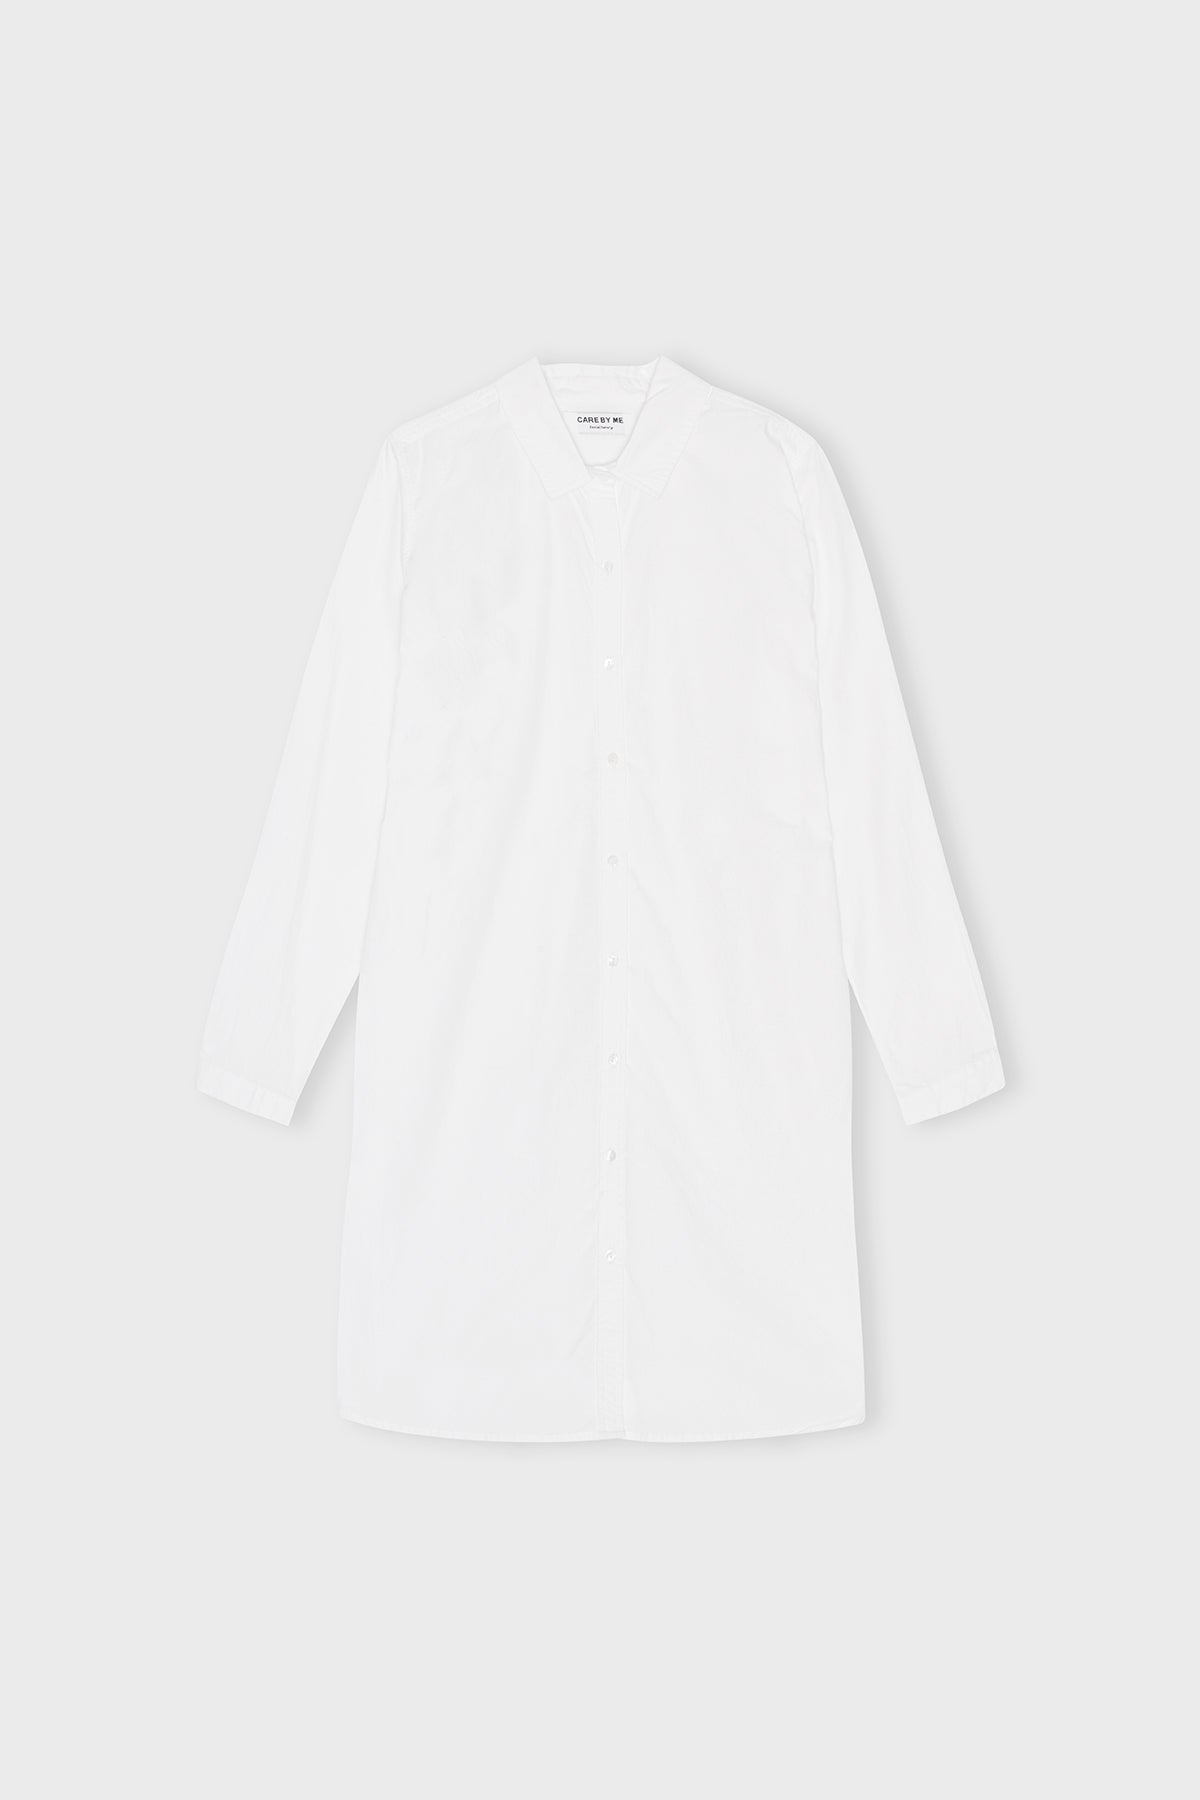 CARE BY ME Laura Long Shirt